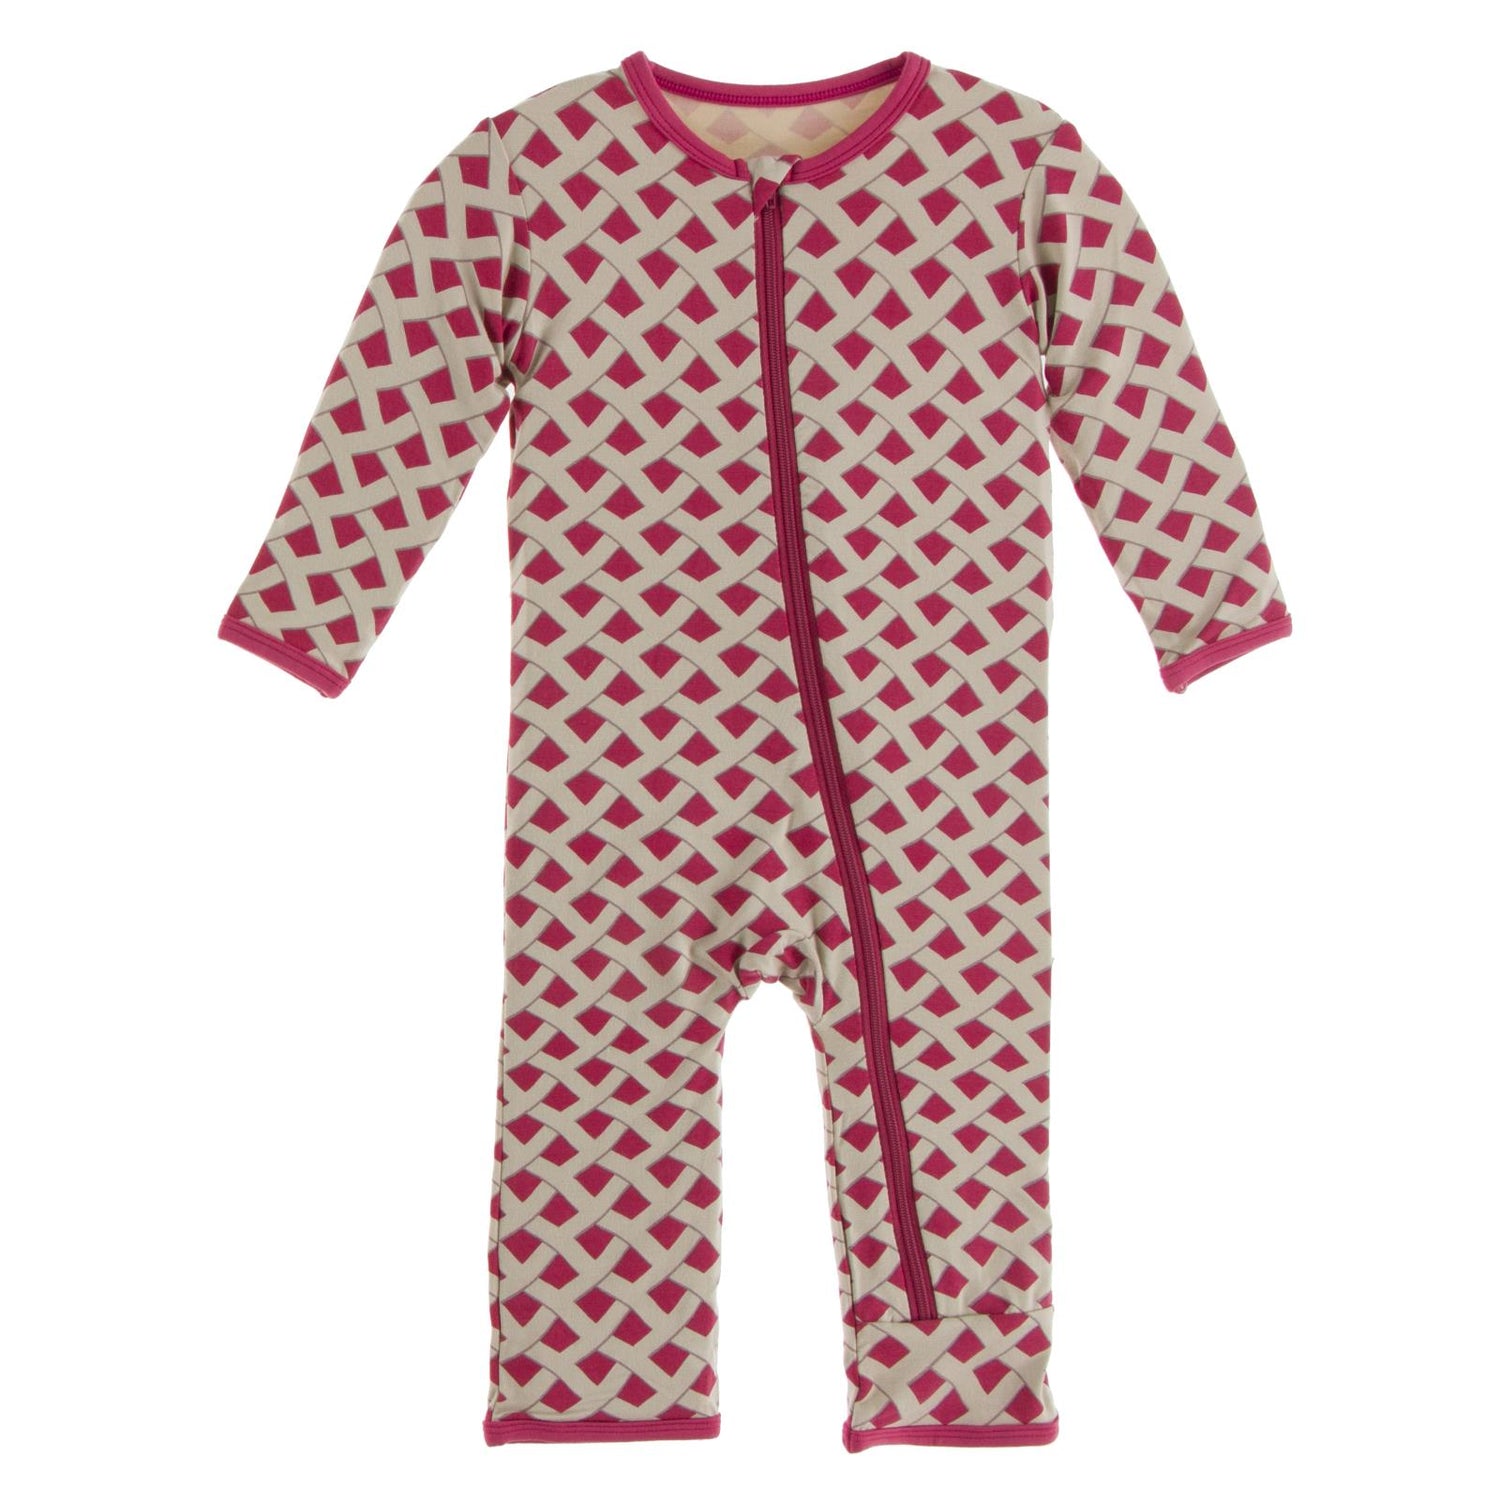 Print Coverall with Zipper in Summer Berry Pie